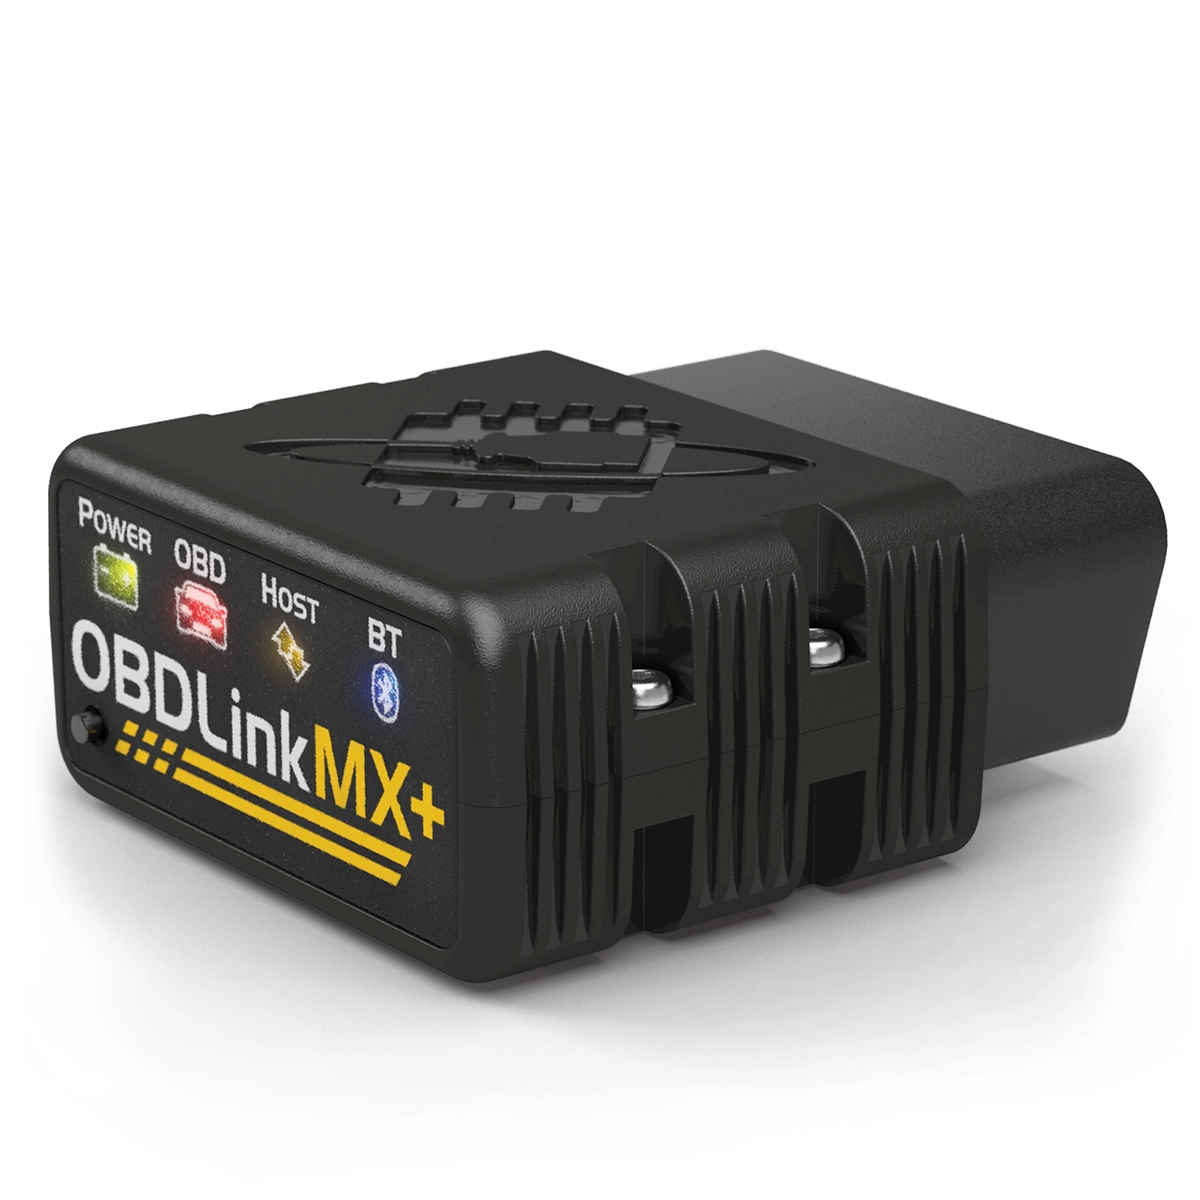 Featured image for “Obdlink mx plus自動車診断ツール iosおよびandroid用スキャナー”